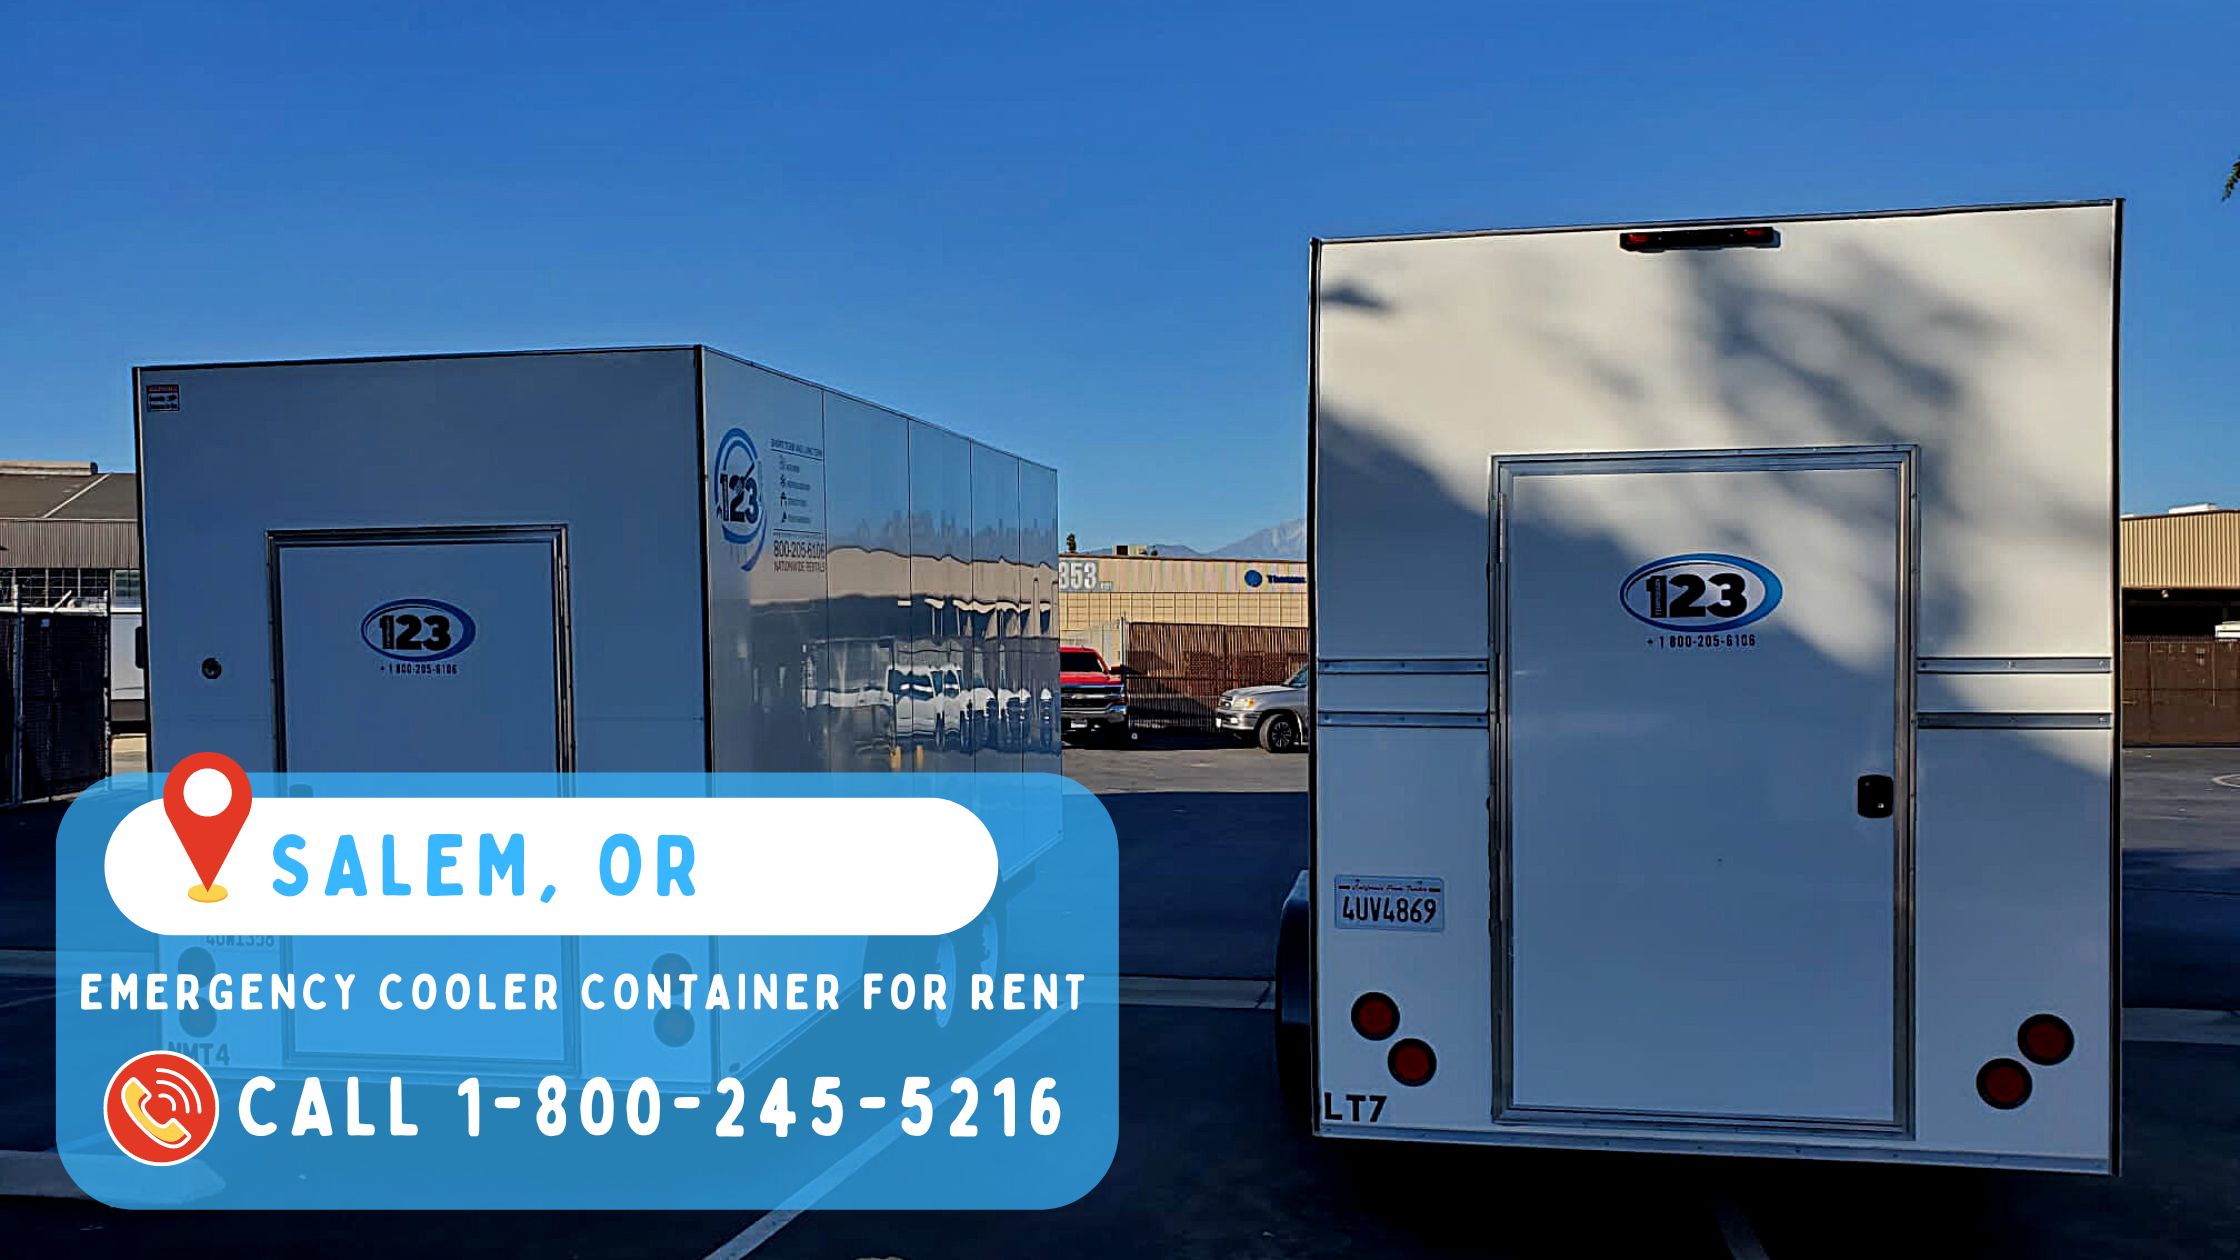 Emergency Cooler Container for Rent in Salem